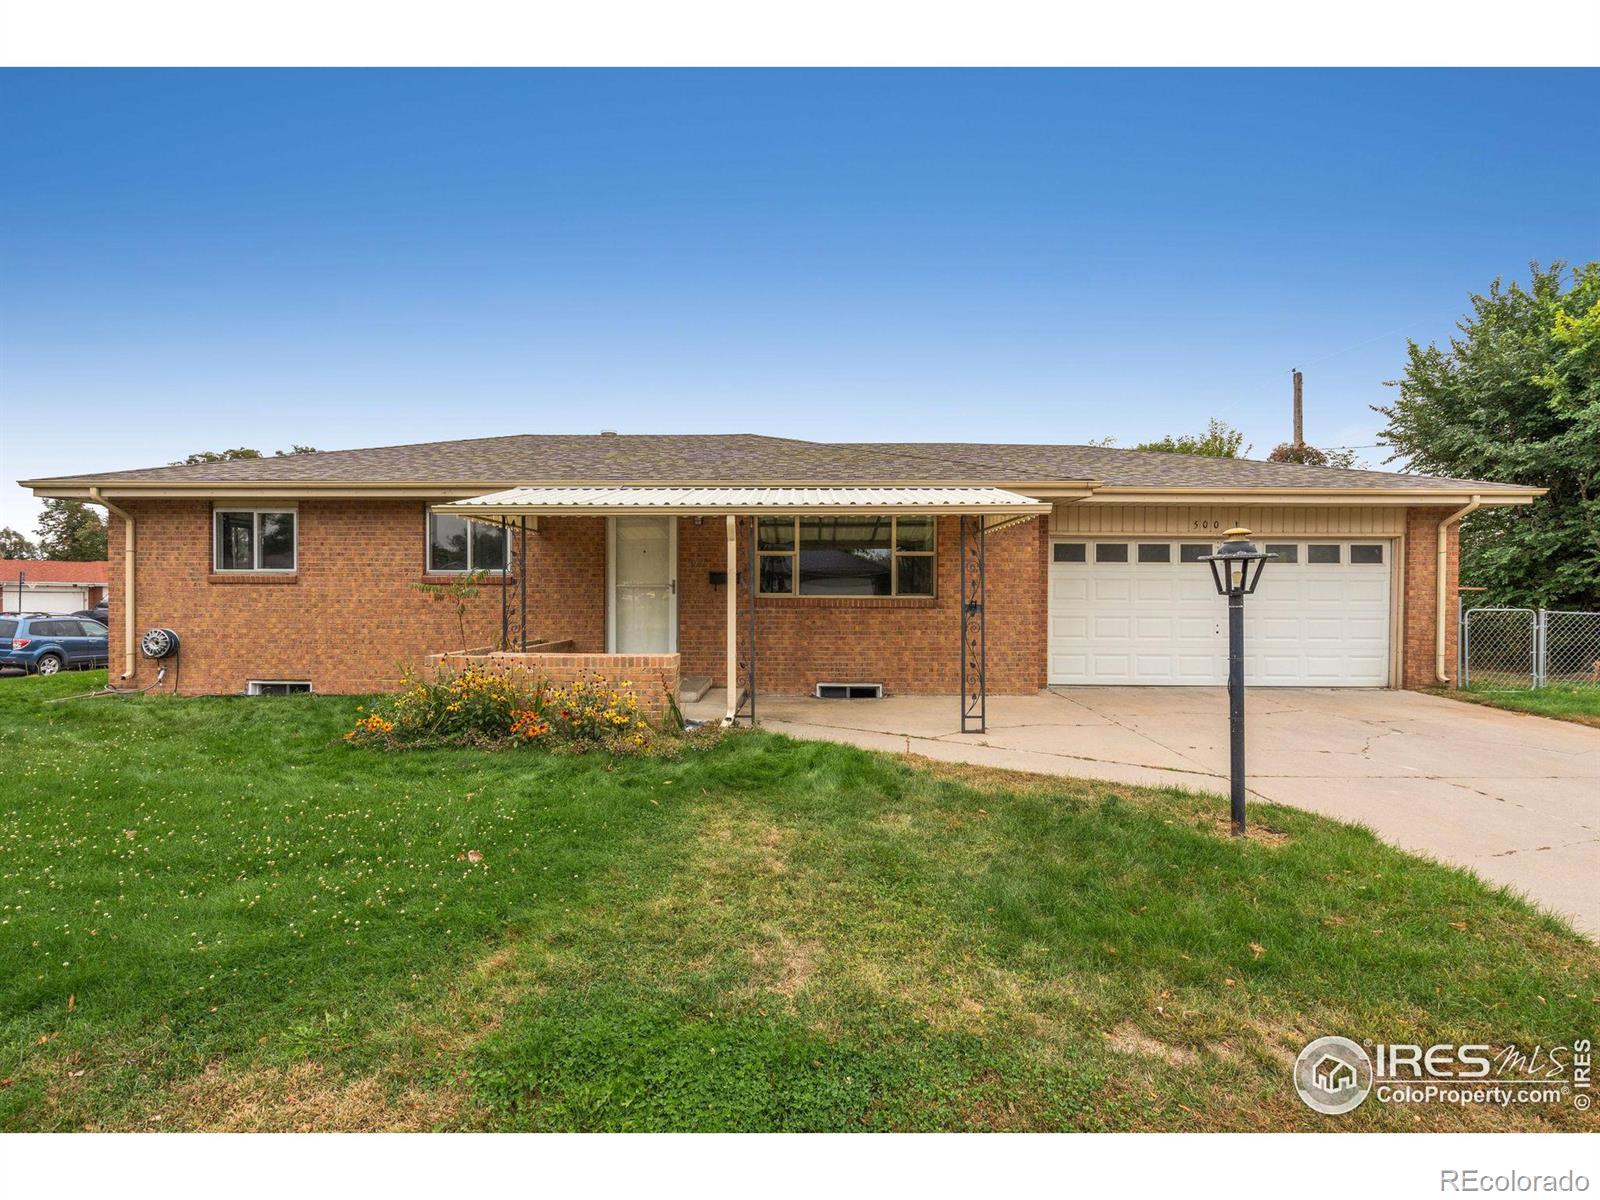 500  31st Avenue, greeley MLS: 123456789998008 Beds: 4 Baths: 2 Price: $340,000